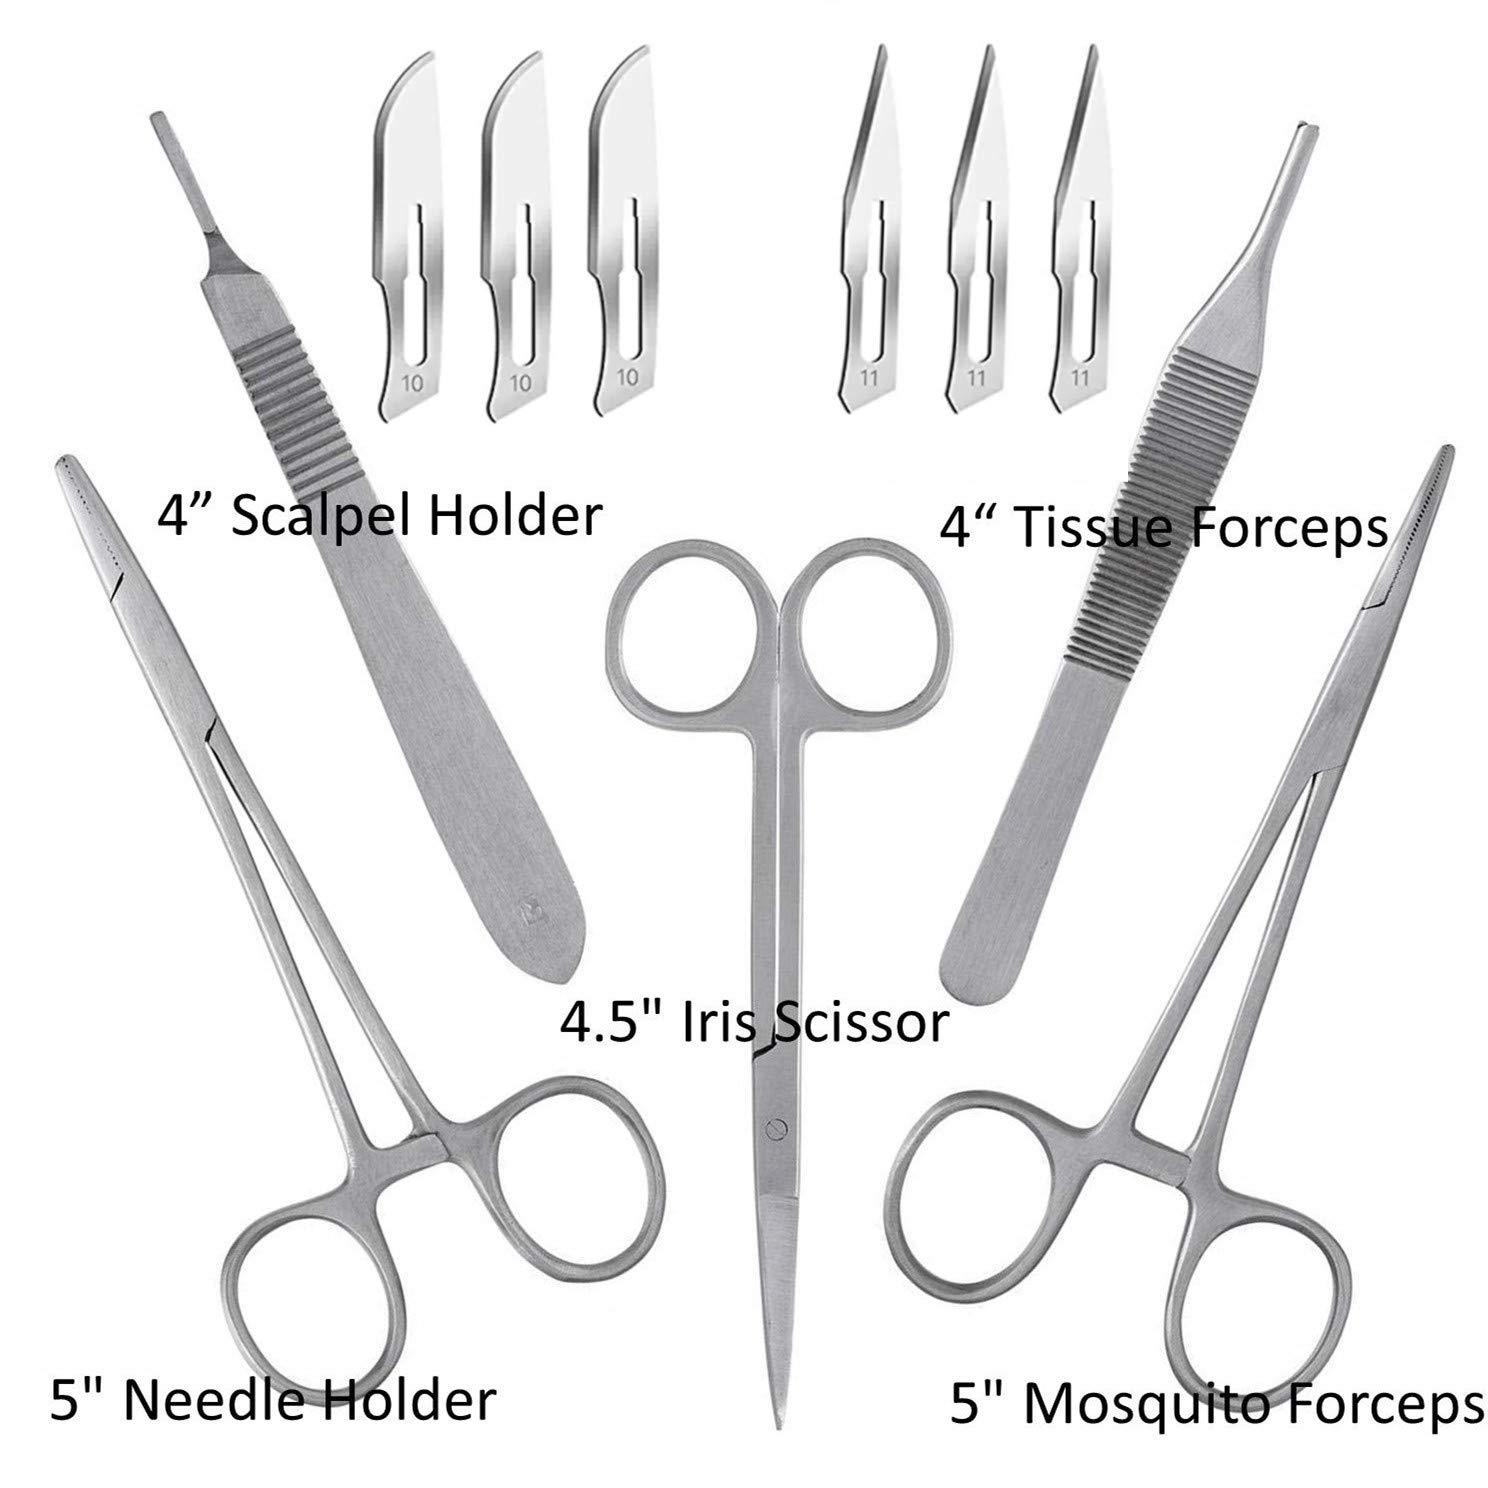 Suture Kit | Suture Practice Kit for Medical Students | 24 Mixed Sutures  Thread with Needle and Suture Tool kit | for Medical, Nursing, and Vet